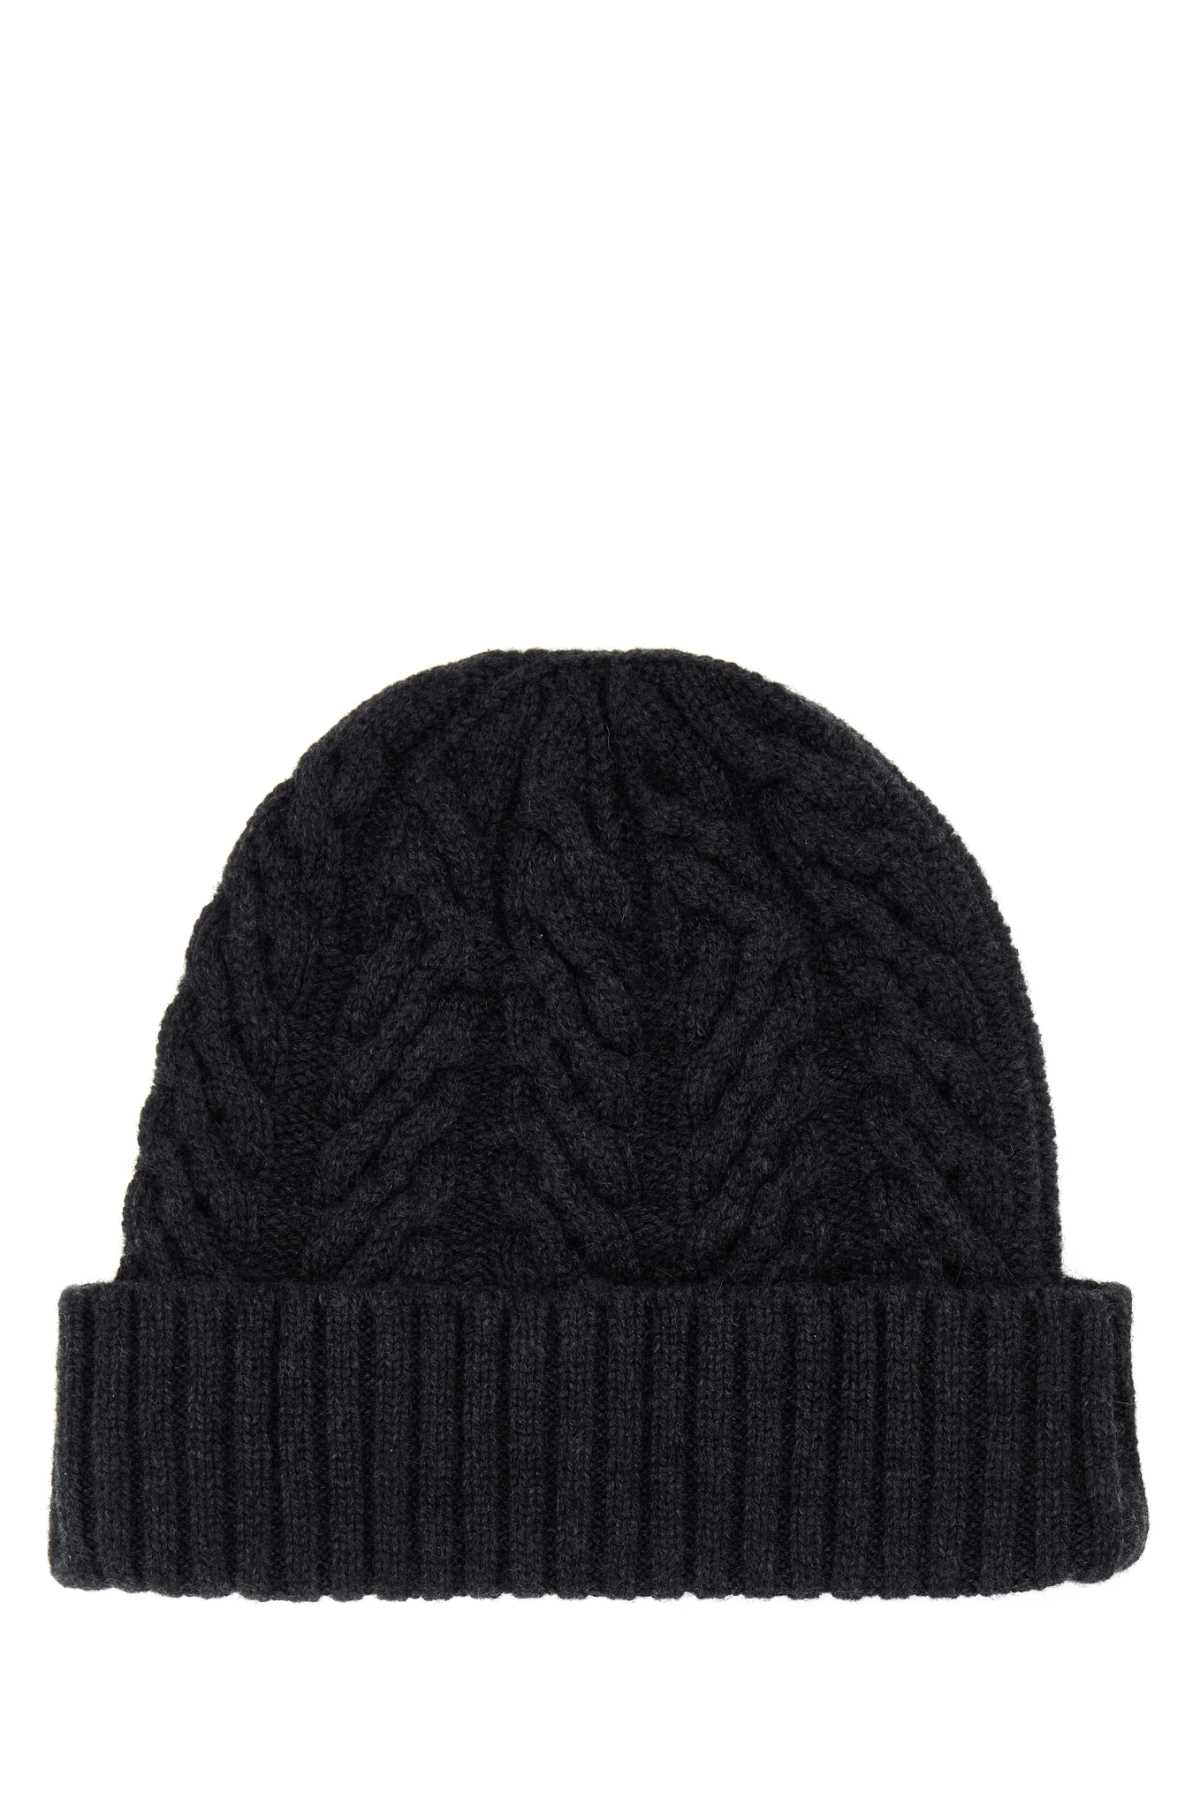 Moorer Charcoal Cashmere Beanie Hat In Carbon